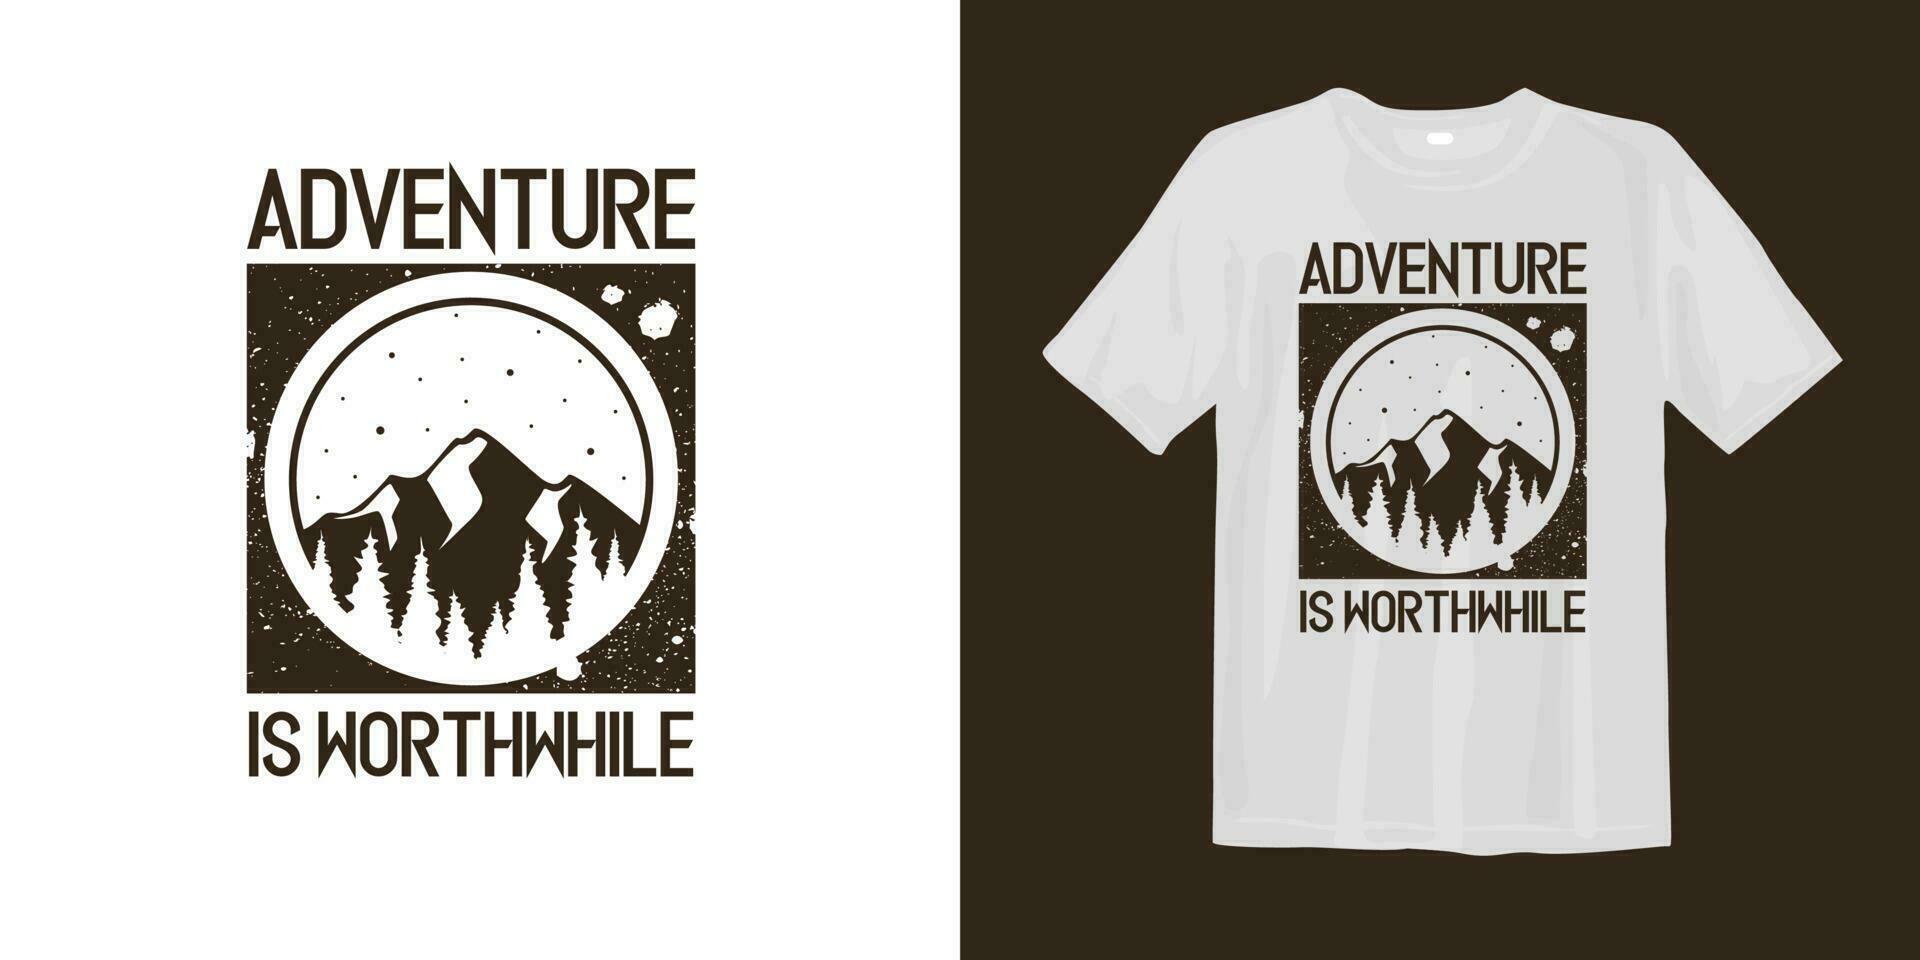 Adventure is worthwhile. typography, print, vector illustration. Global swatches.